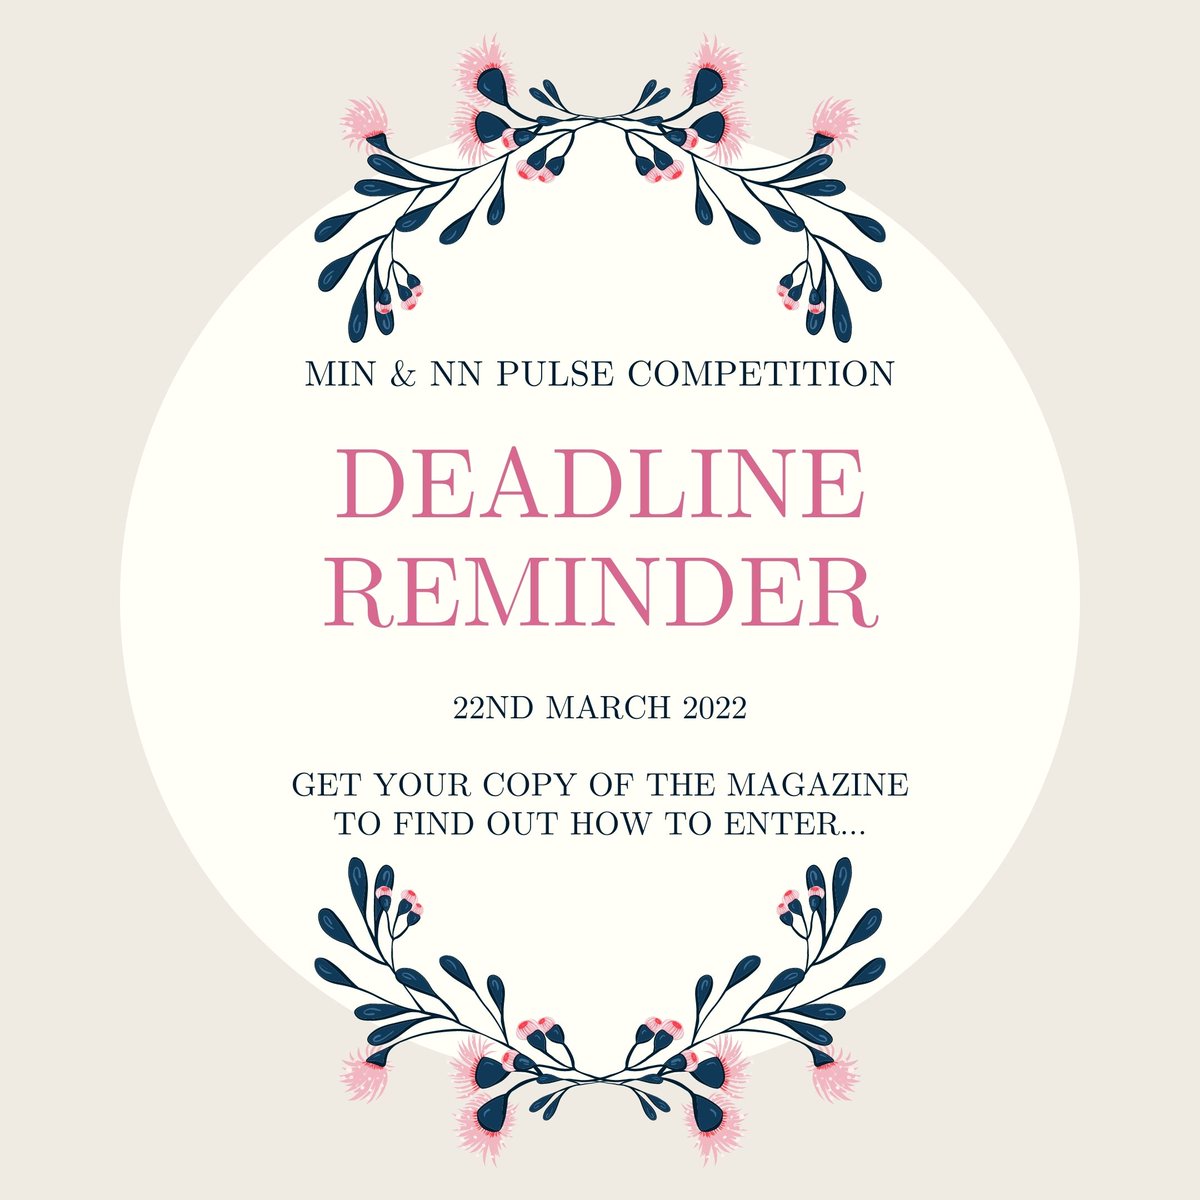 Don't forget to get your entries in before our competition deadline... 22nd March 2022!! Get your copy of the magazine from the MIN shop today at Rushden Lakes... next to Starbucks 🌷